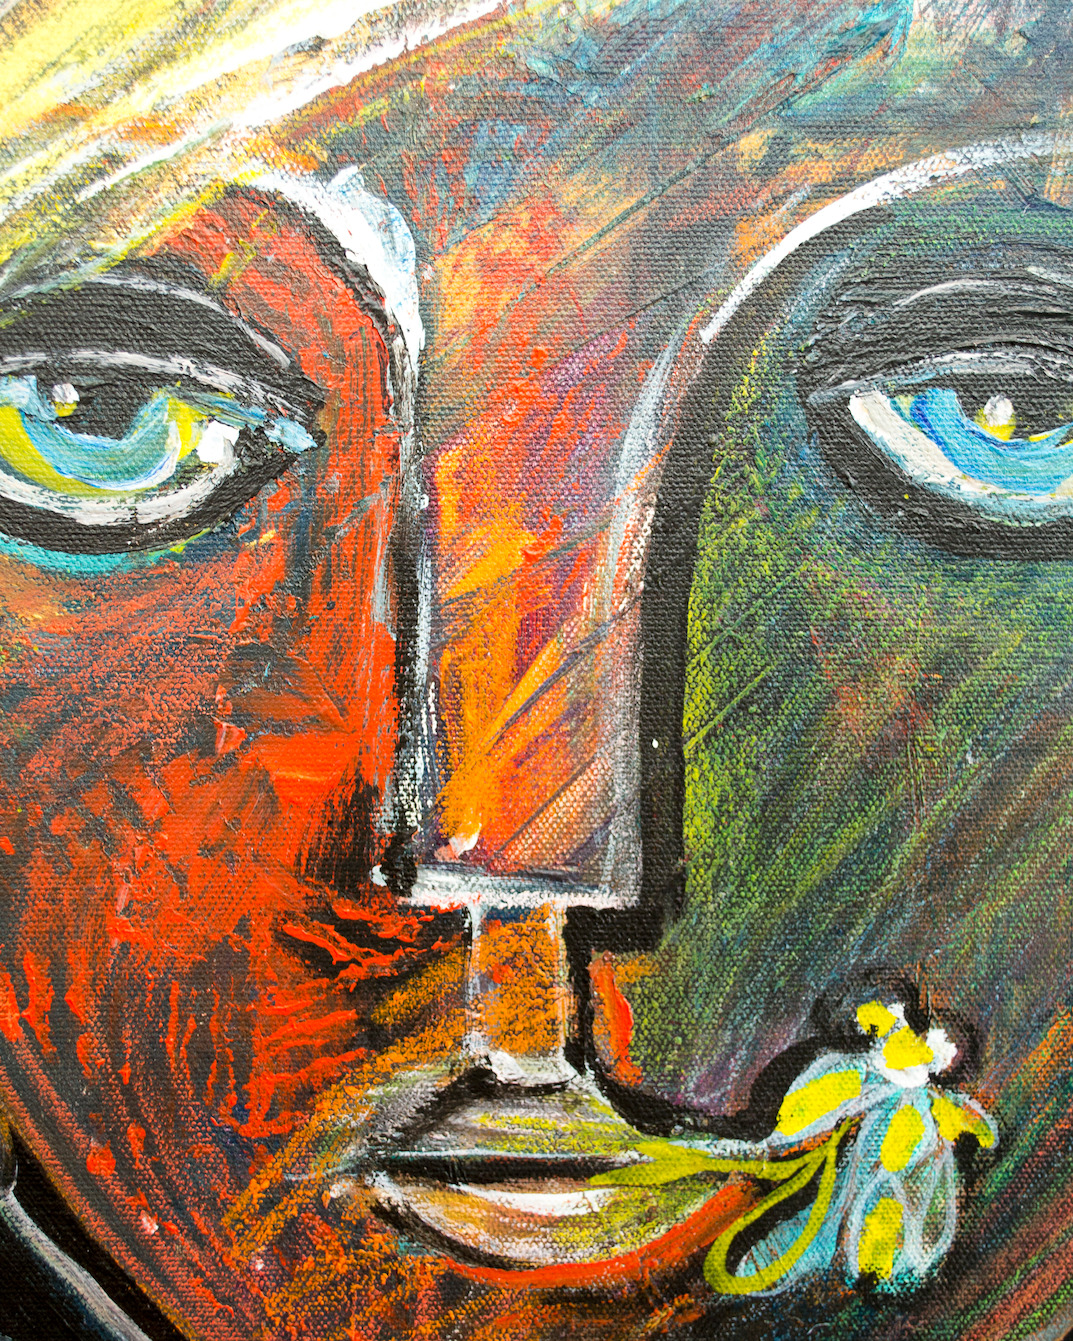 Close Up Detail 1 Of Acrylic Painting "Watching The Daisies Grow" By Lucette Dalozzo